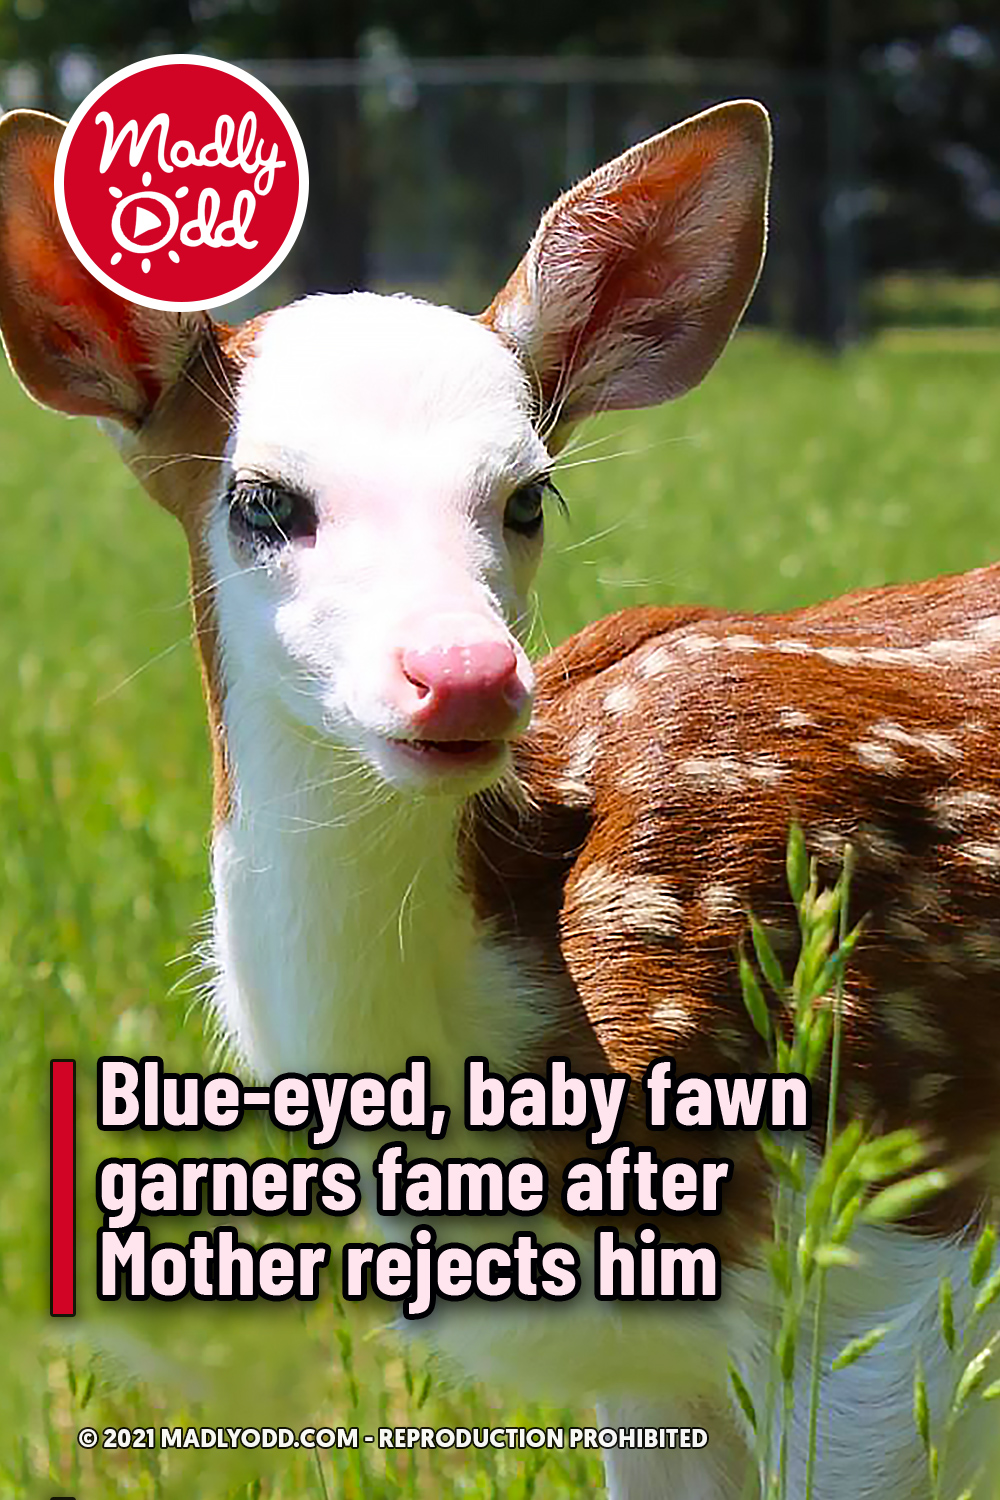 Blue-eyed, baby fawn garners fame after Mother rejects him